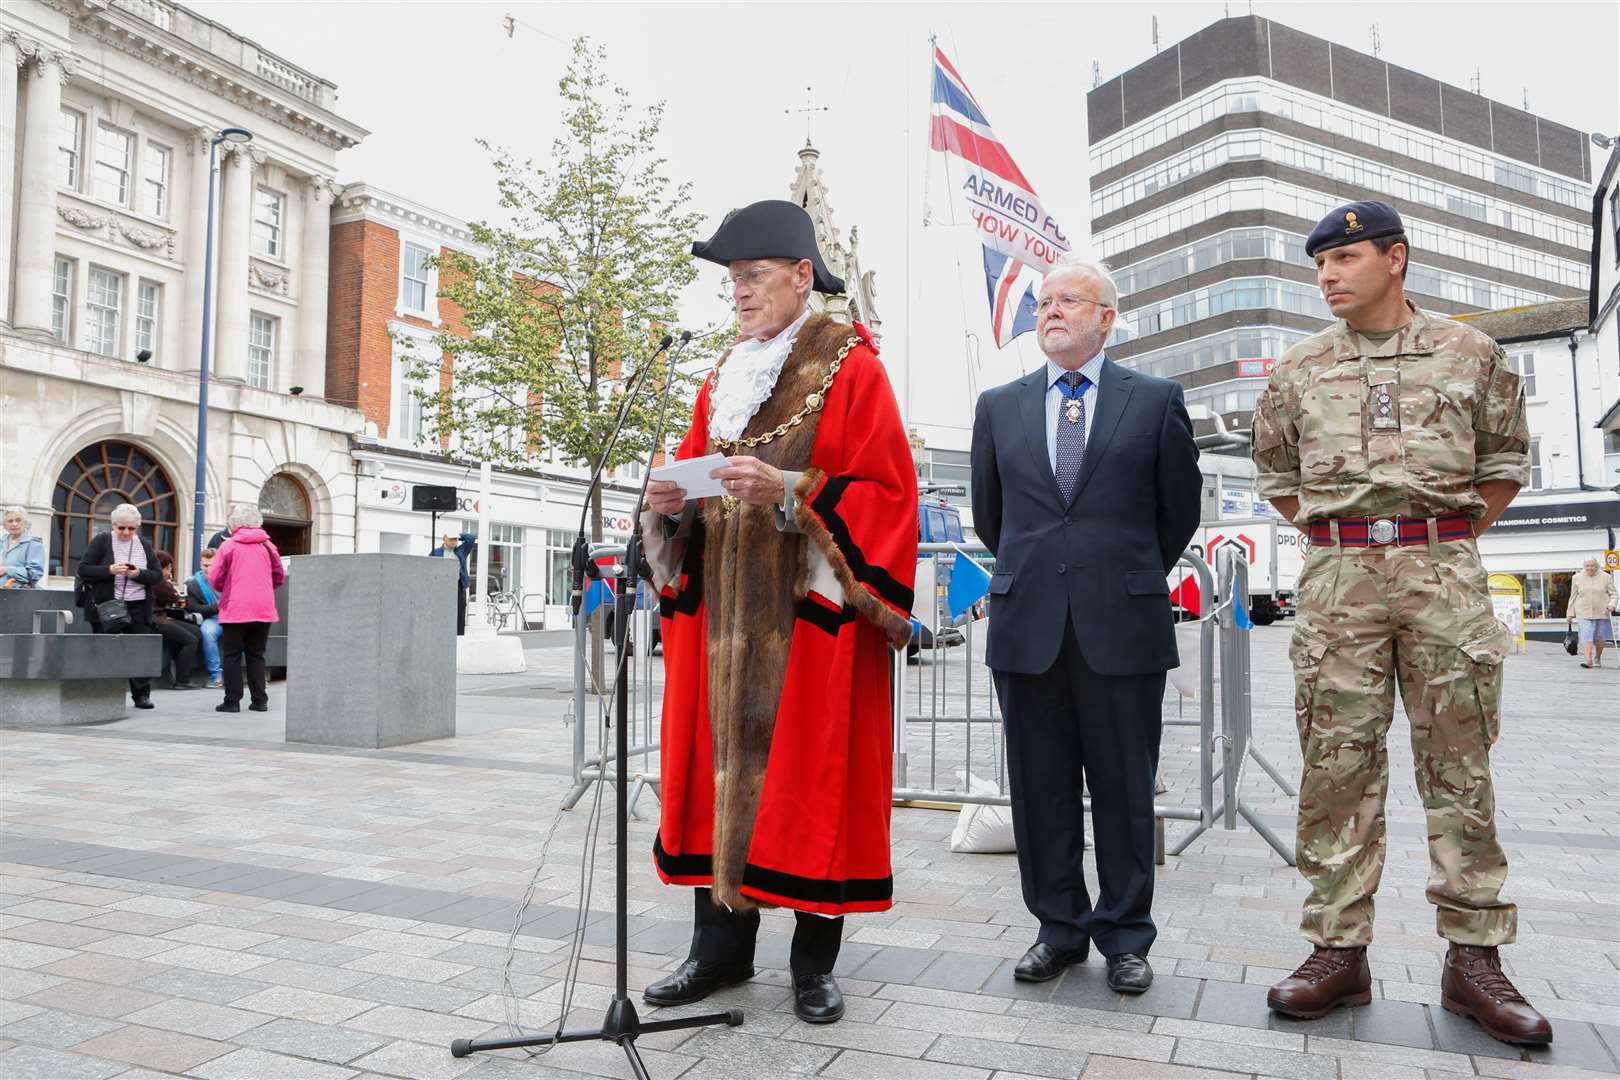 The Mayor makes a speech praising the Armed Forces